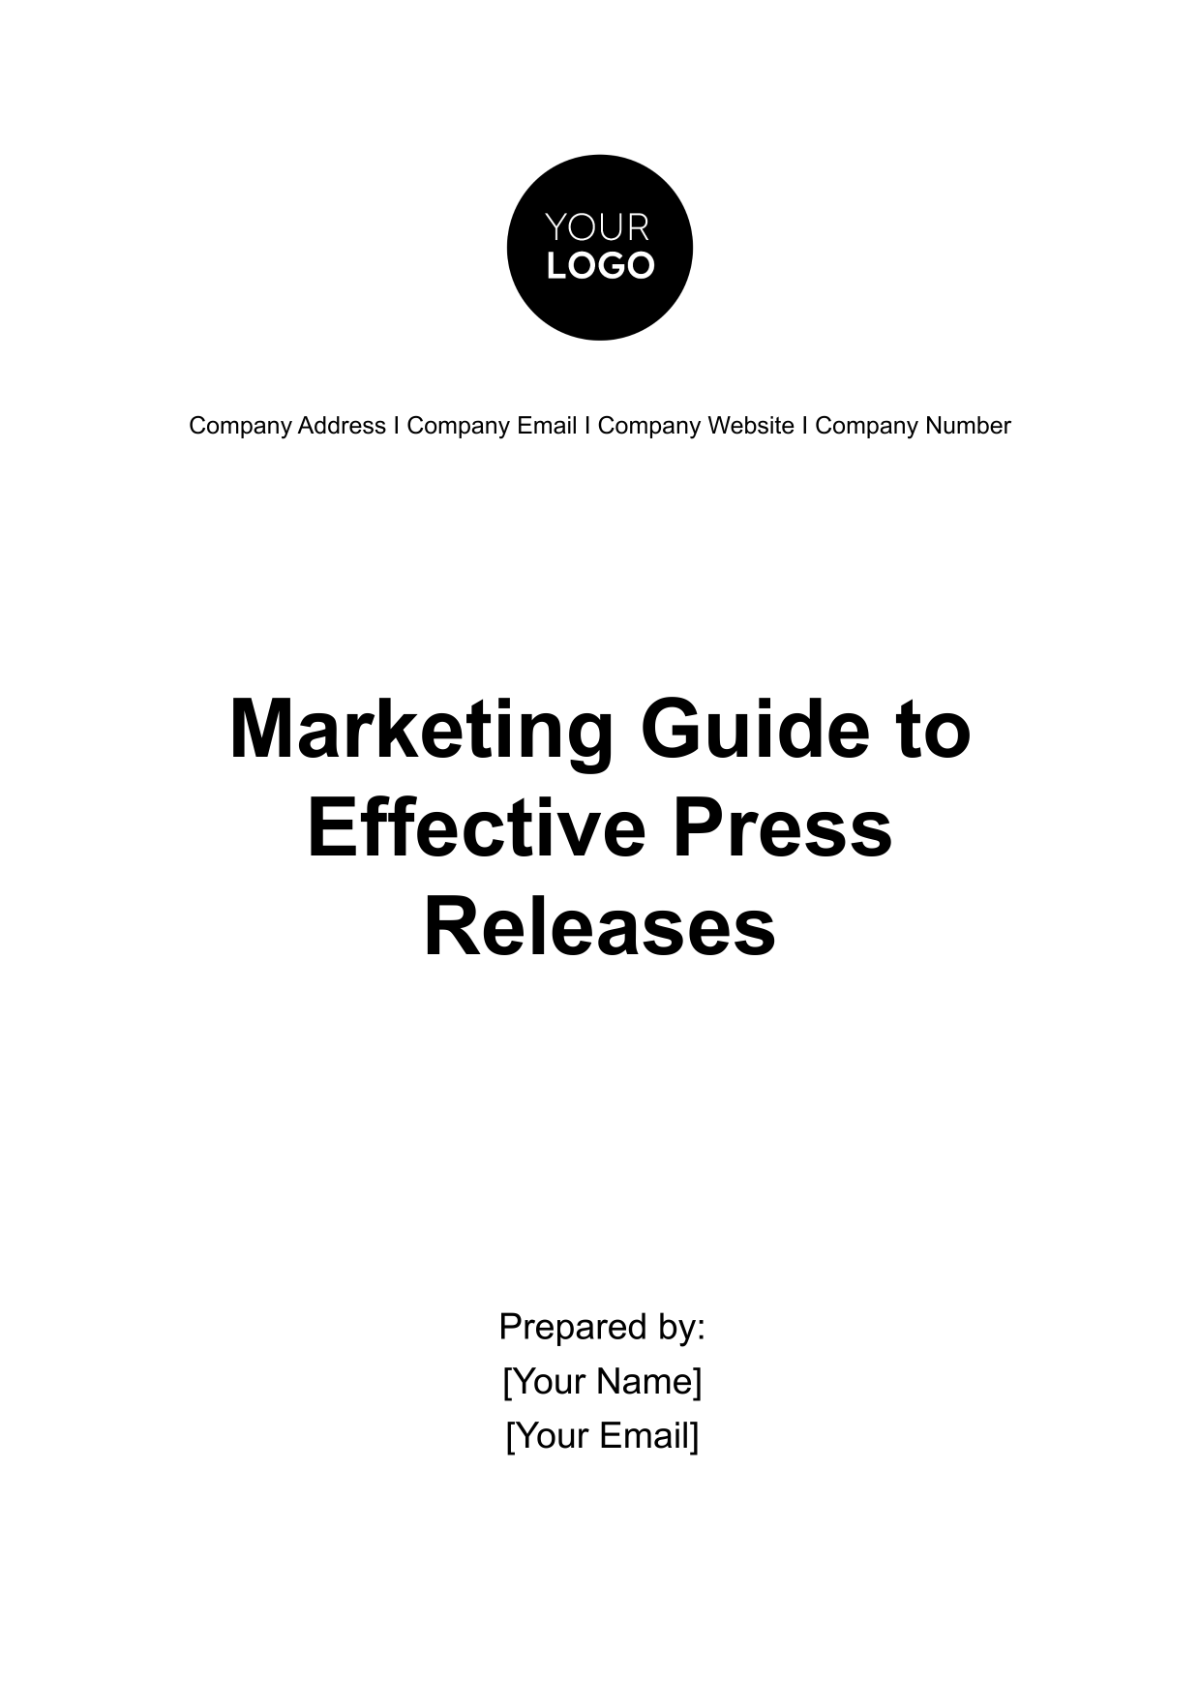 Marketing Guide to Effective Press Releases Template